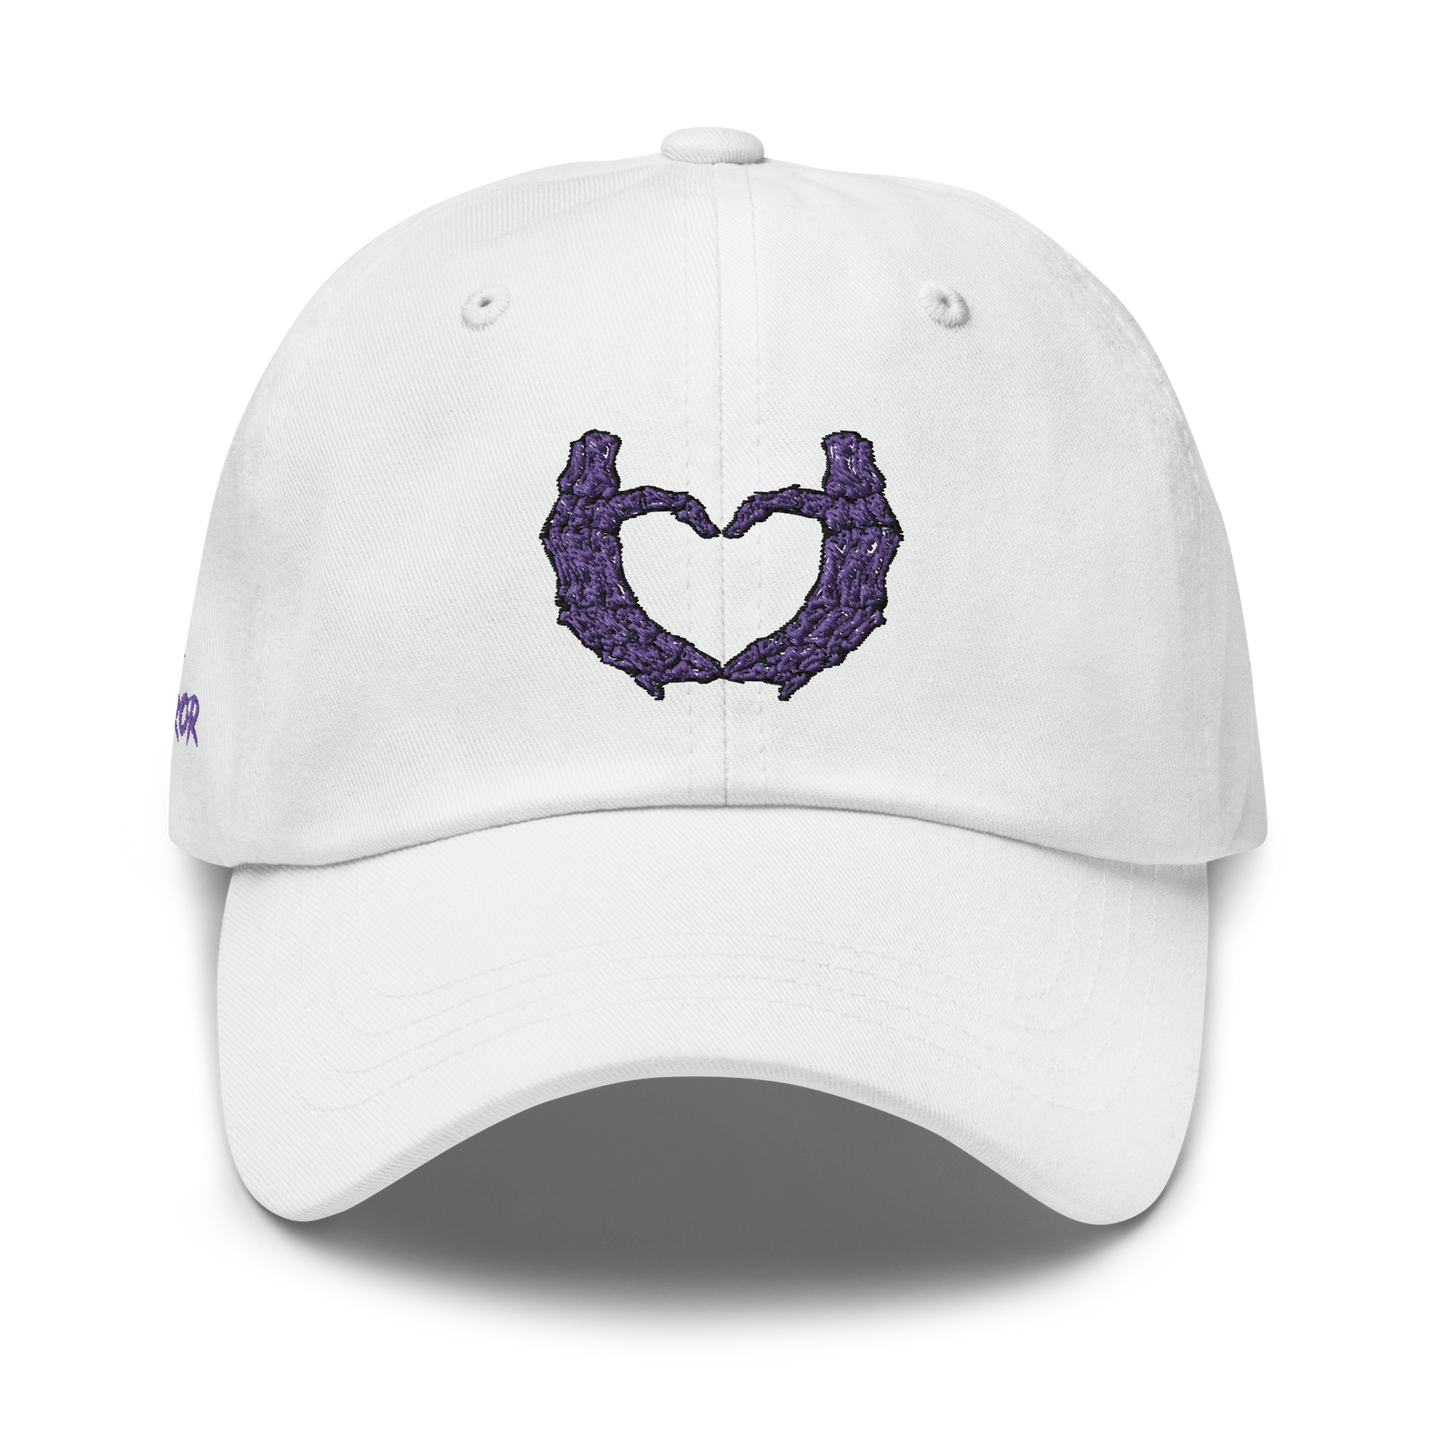 In Love With Horror Dad Hat (stacked name)